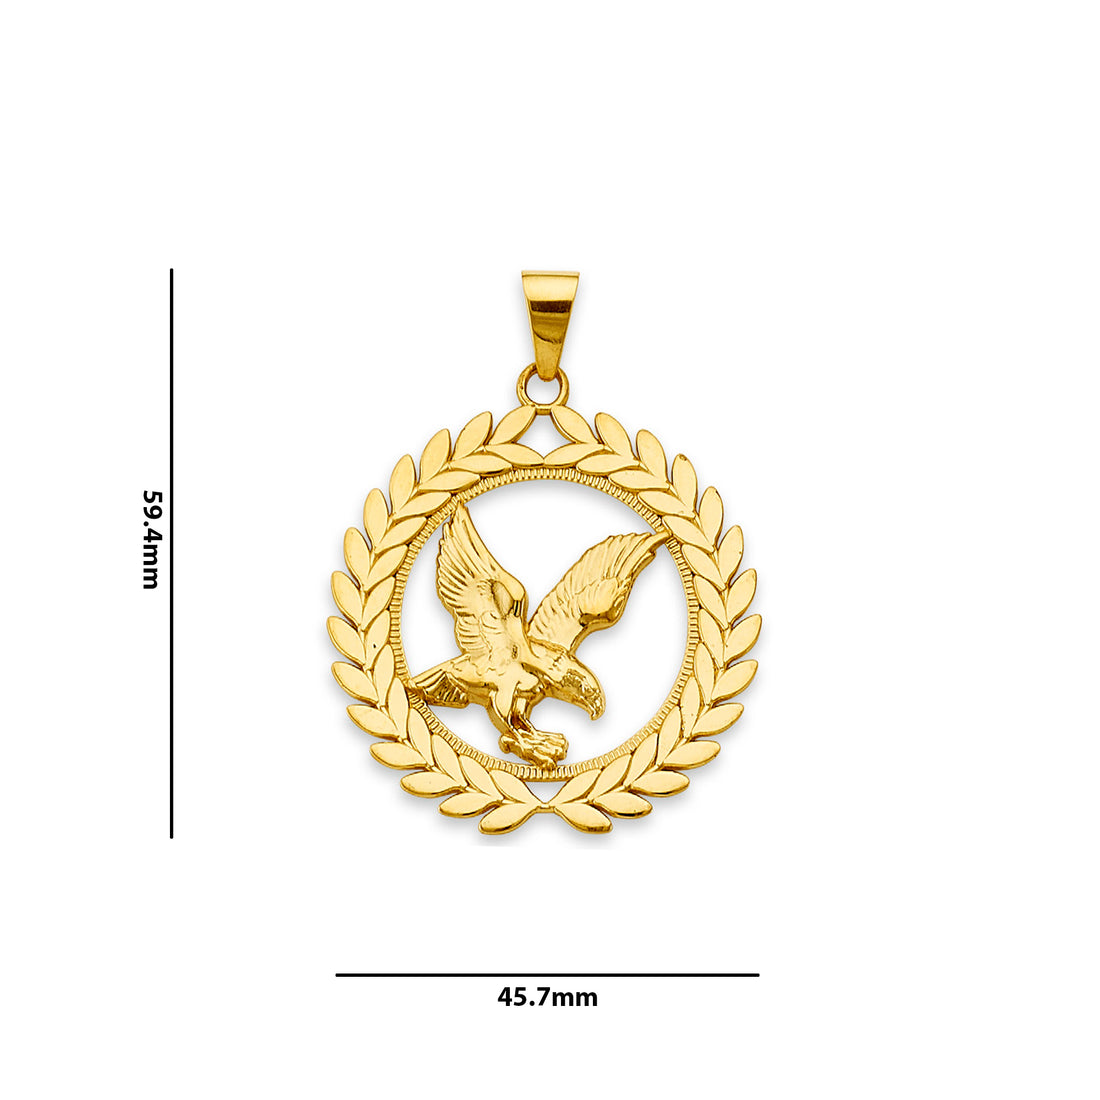 Yellow Gold Leaf Border Flying Eagle Charm Pendant  with Measurement